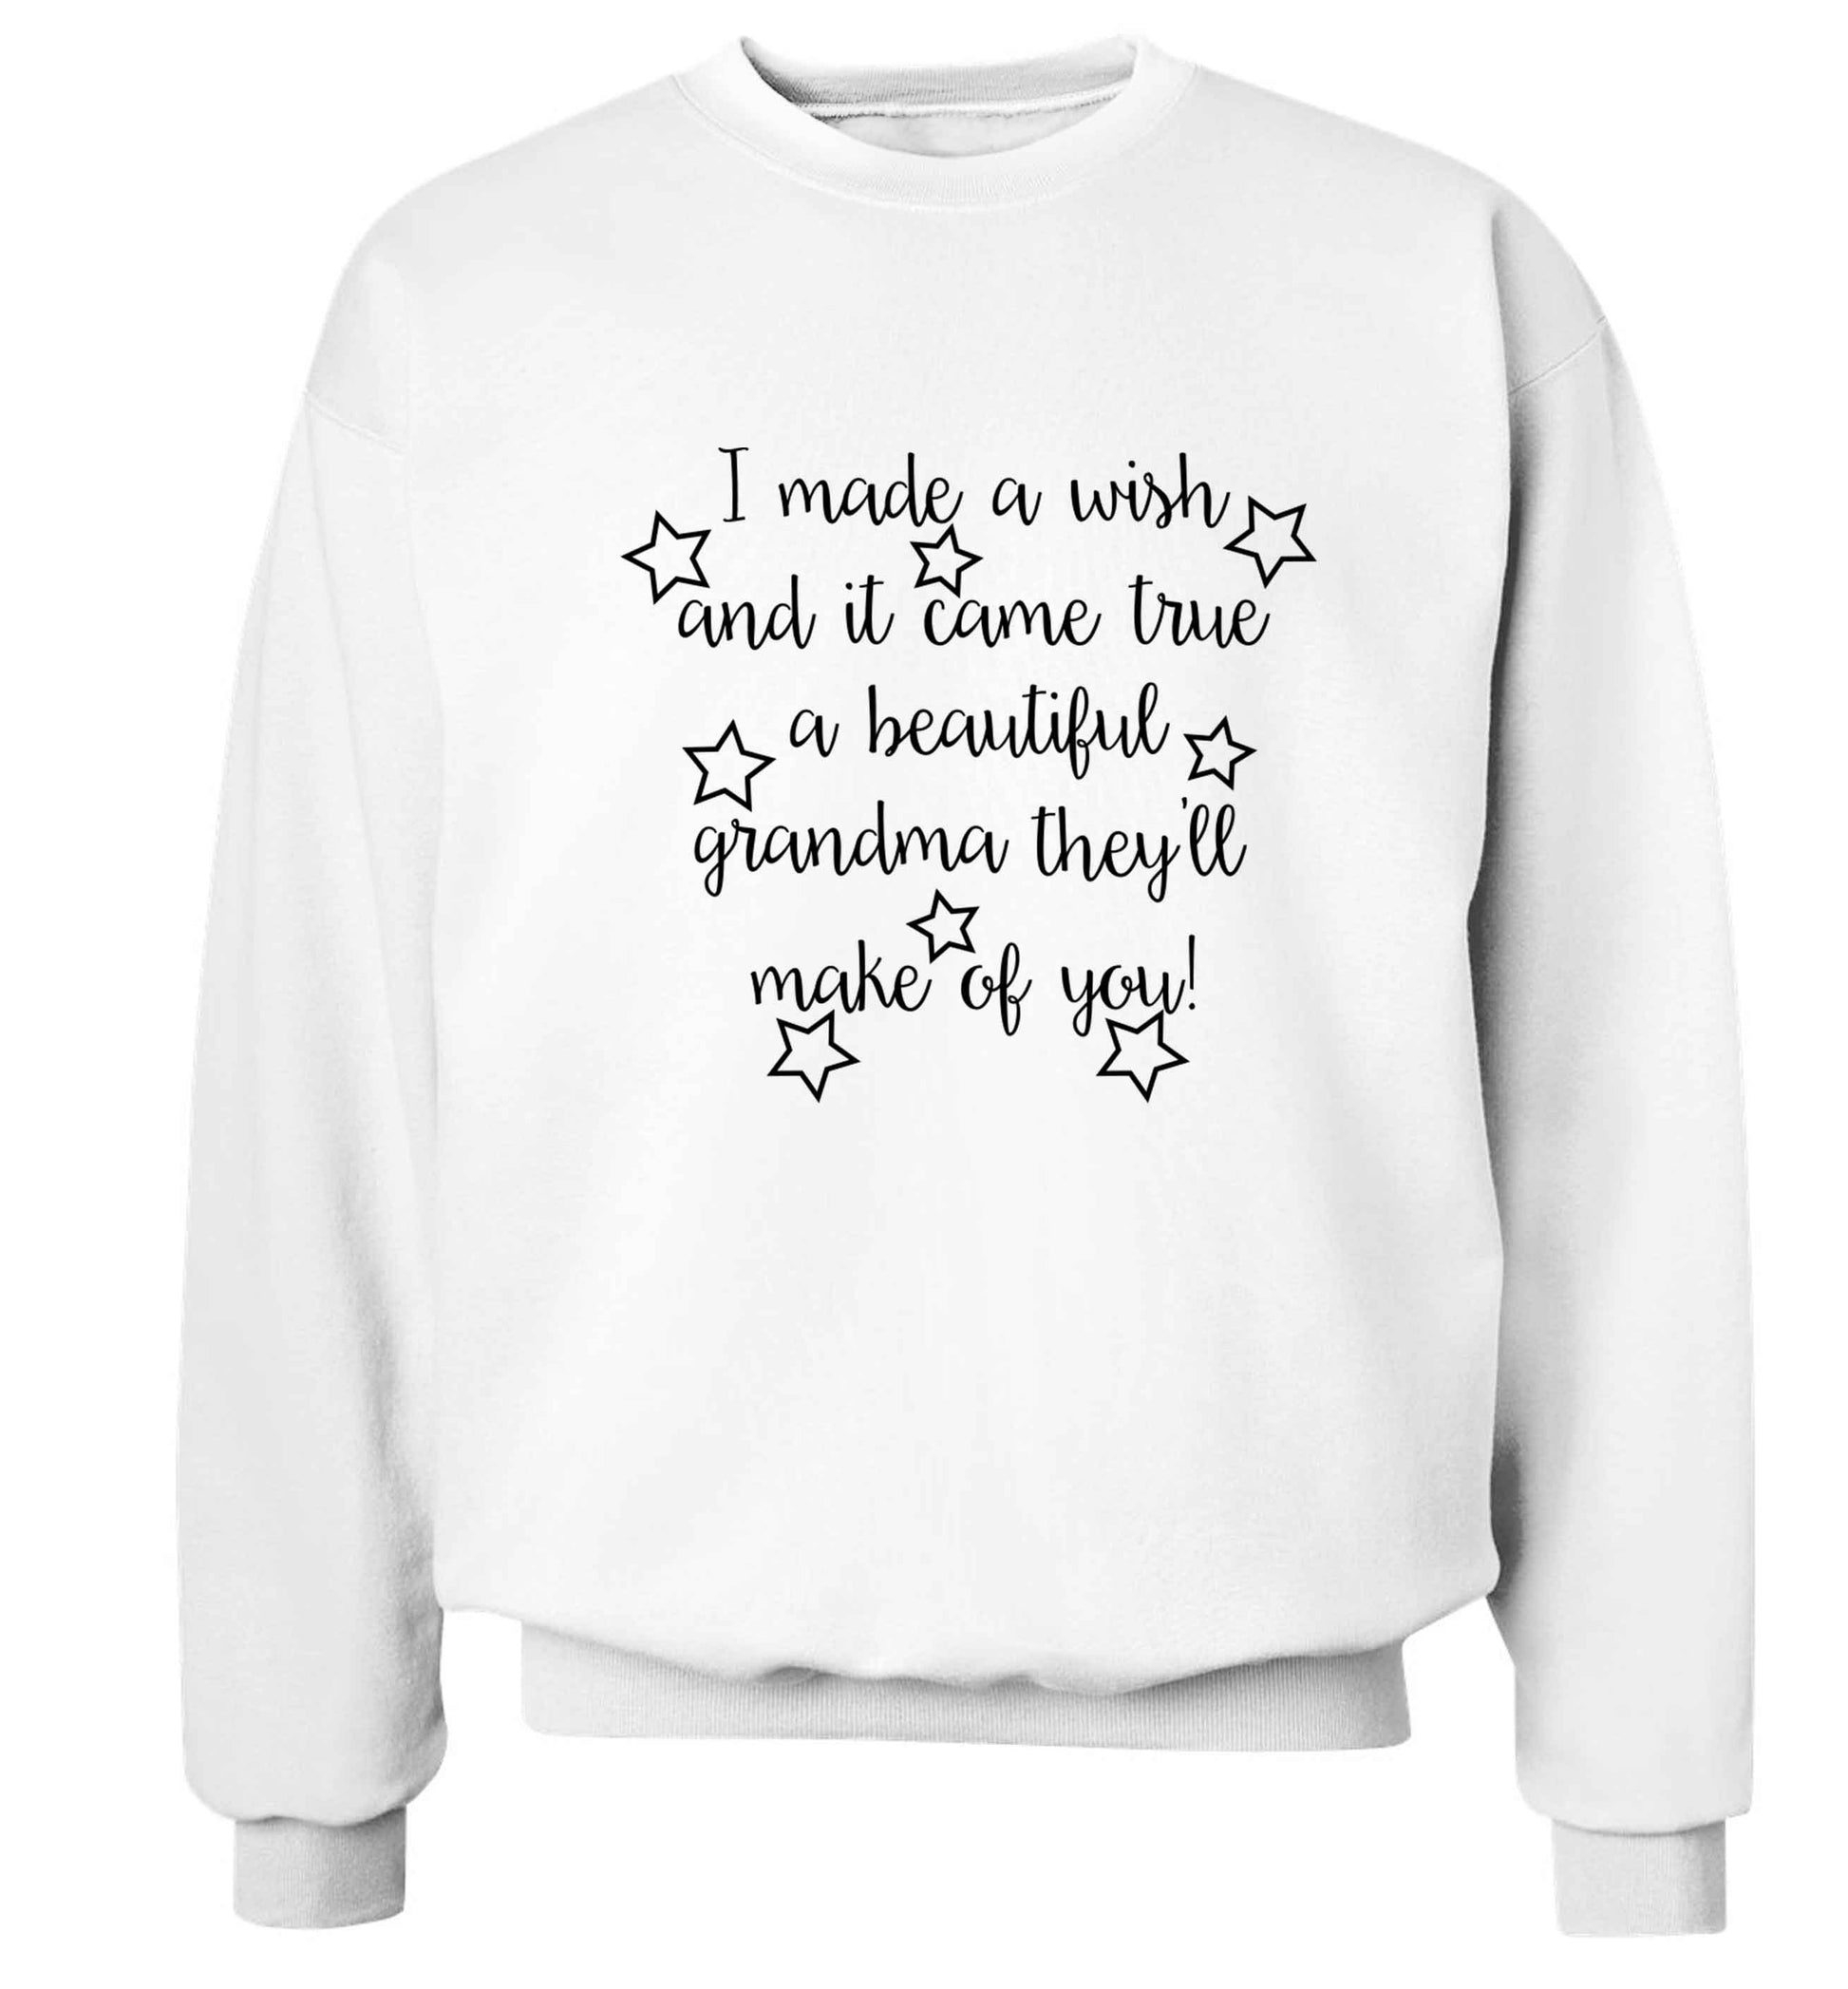 I made a wish and it came true a beautiful grandma they'll make of you! Adult's unisex white Sweater 2XL